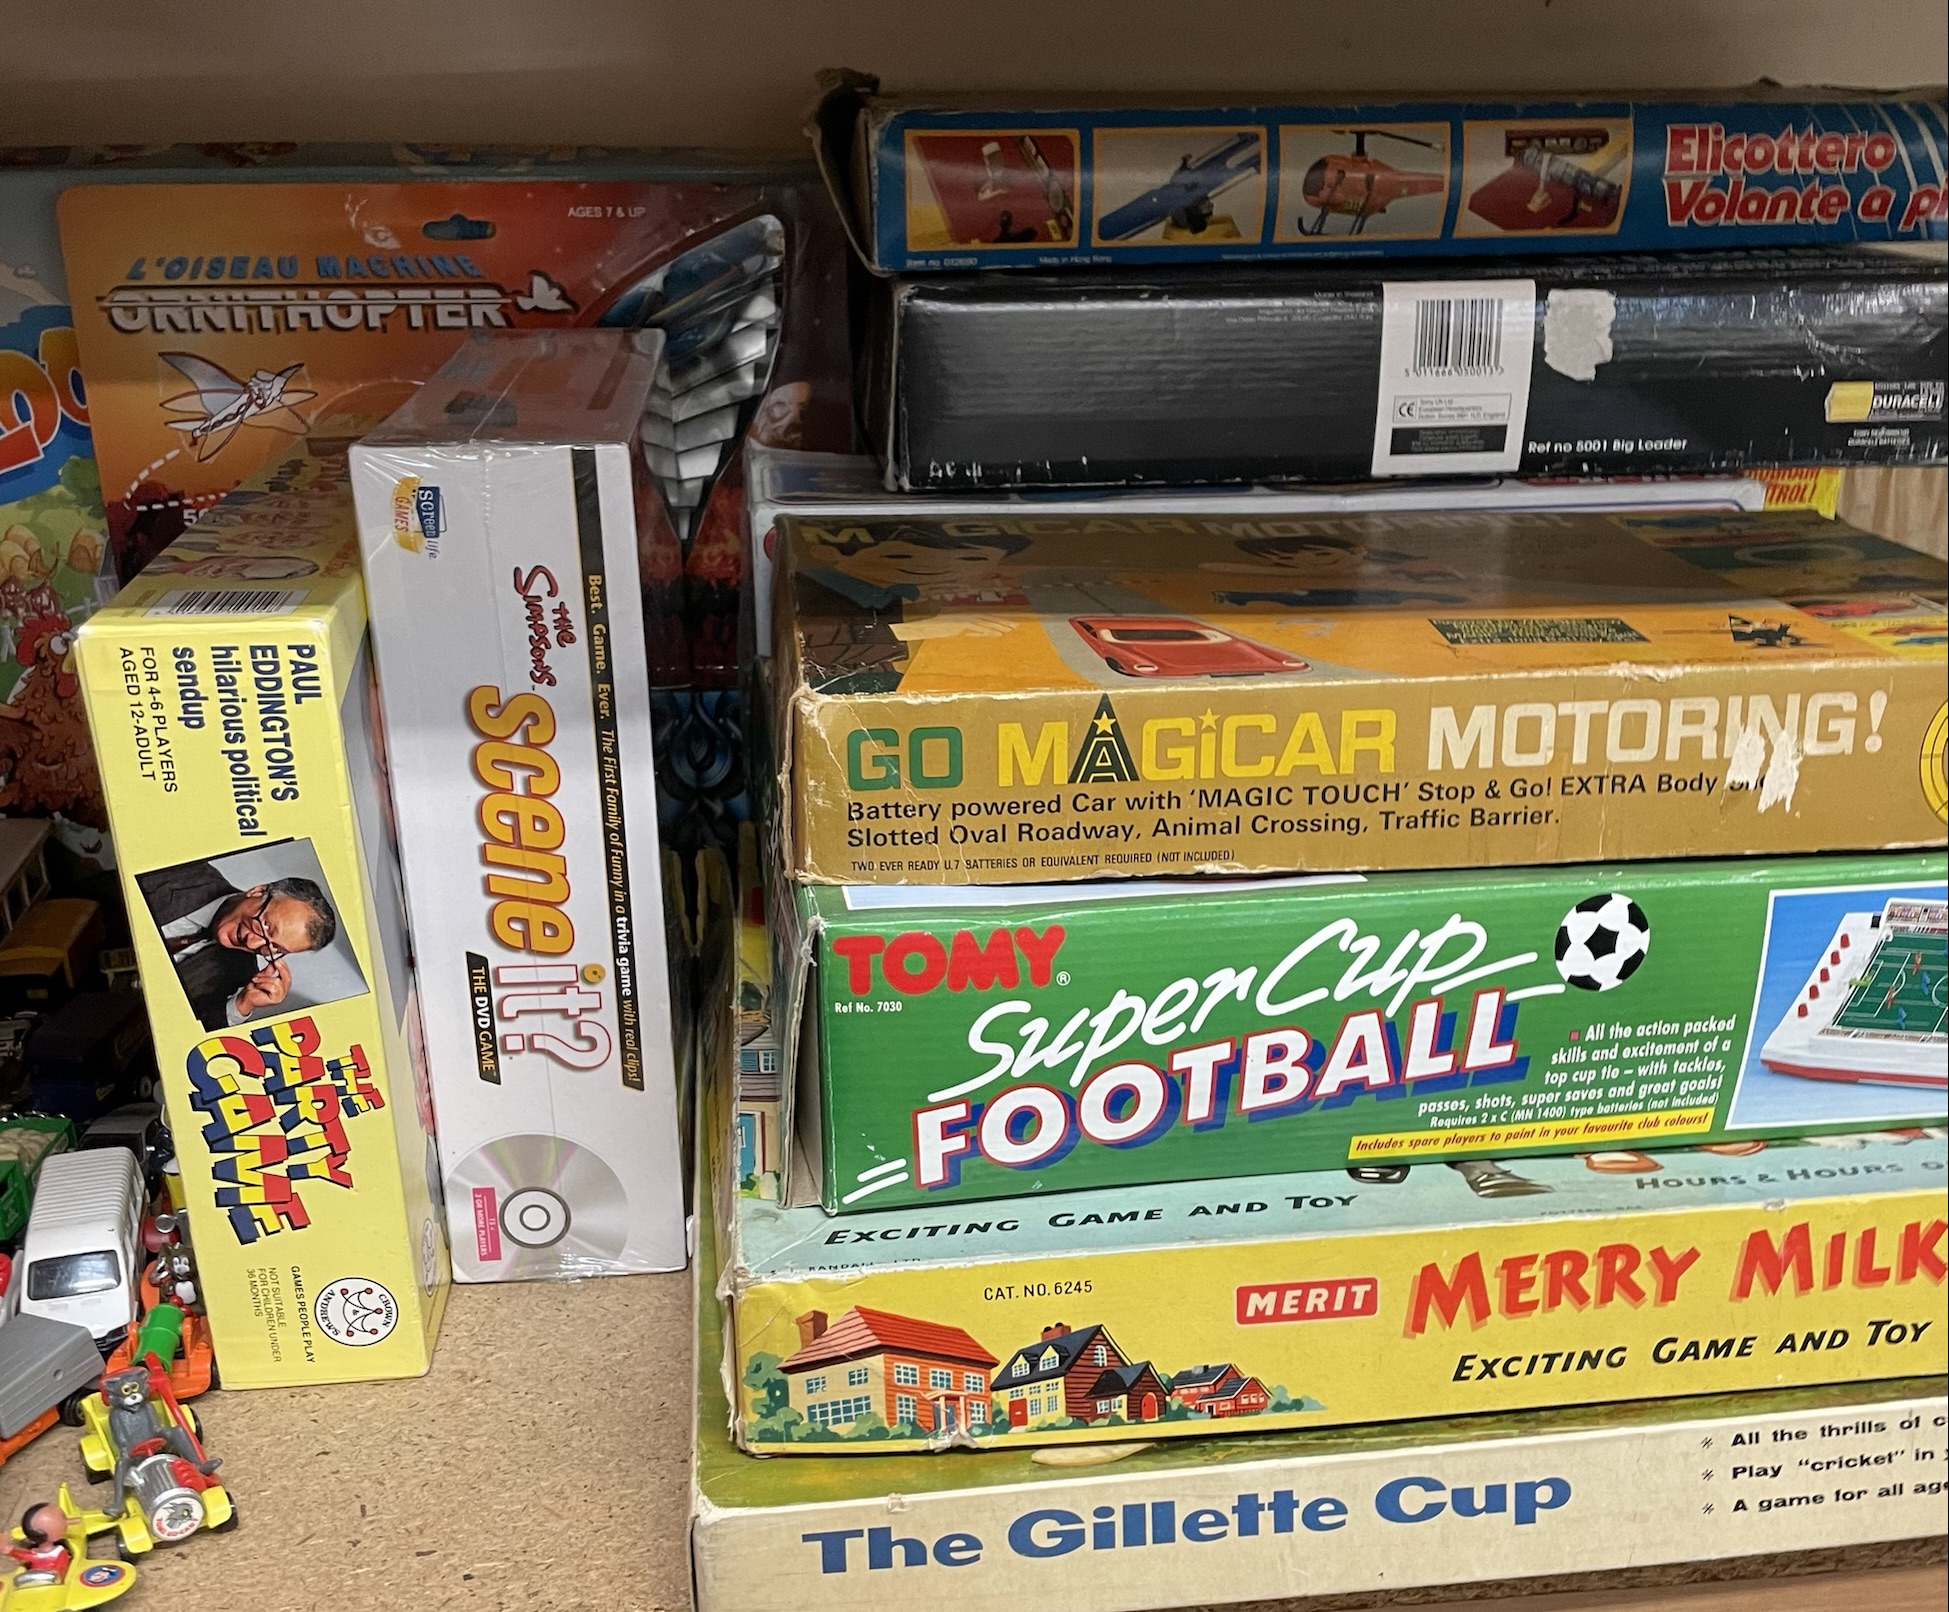 A collection of board games, including The Gillette Cup, Merry Milkman, Super Cup Football, - Image 2 of 5